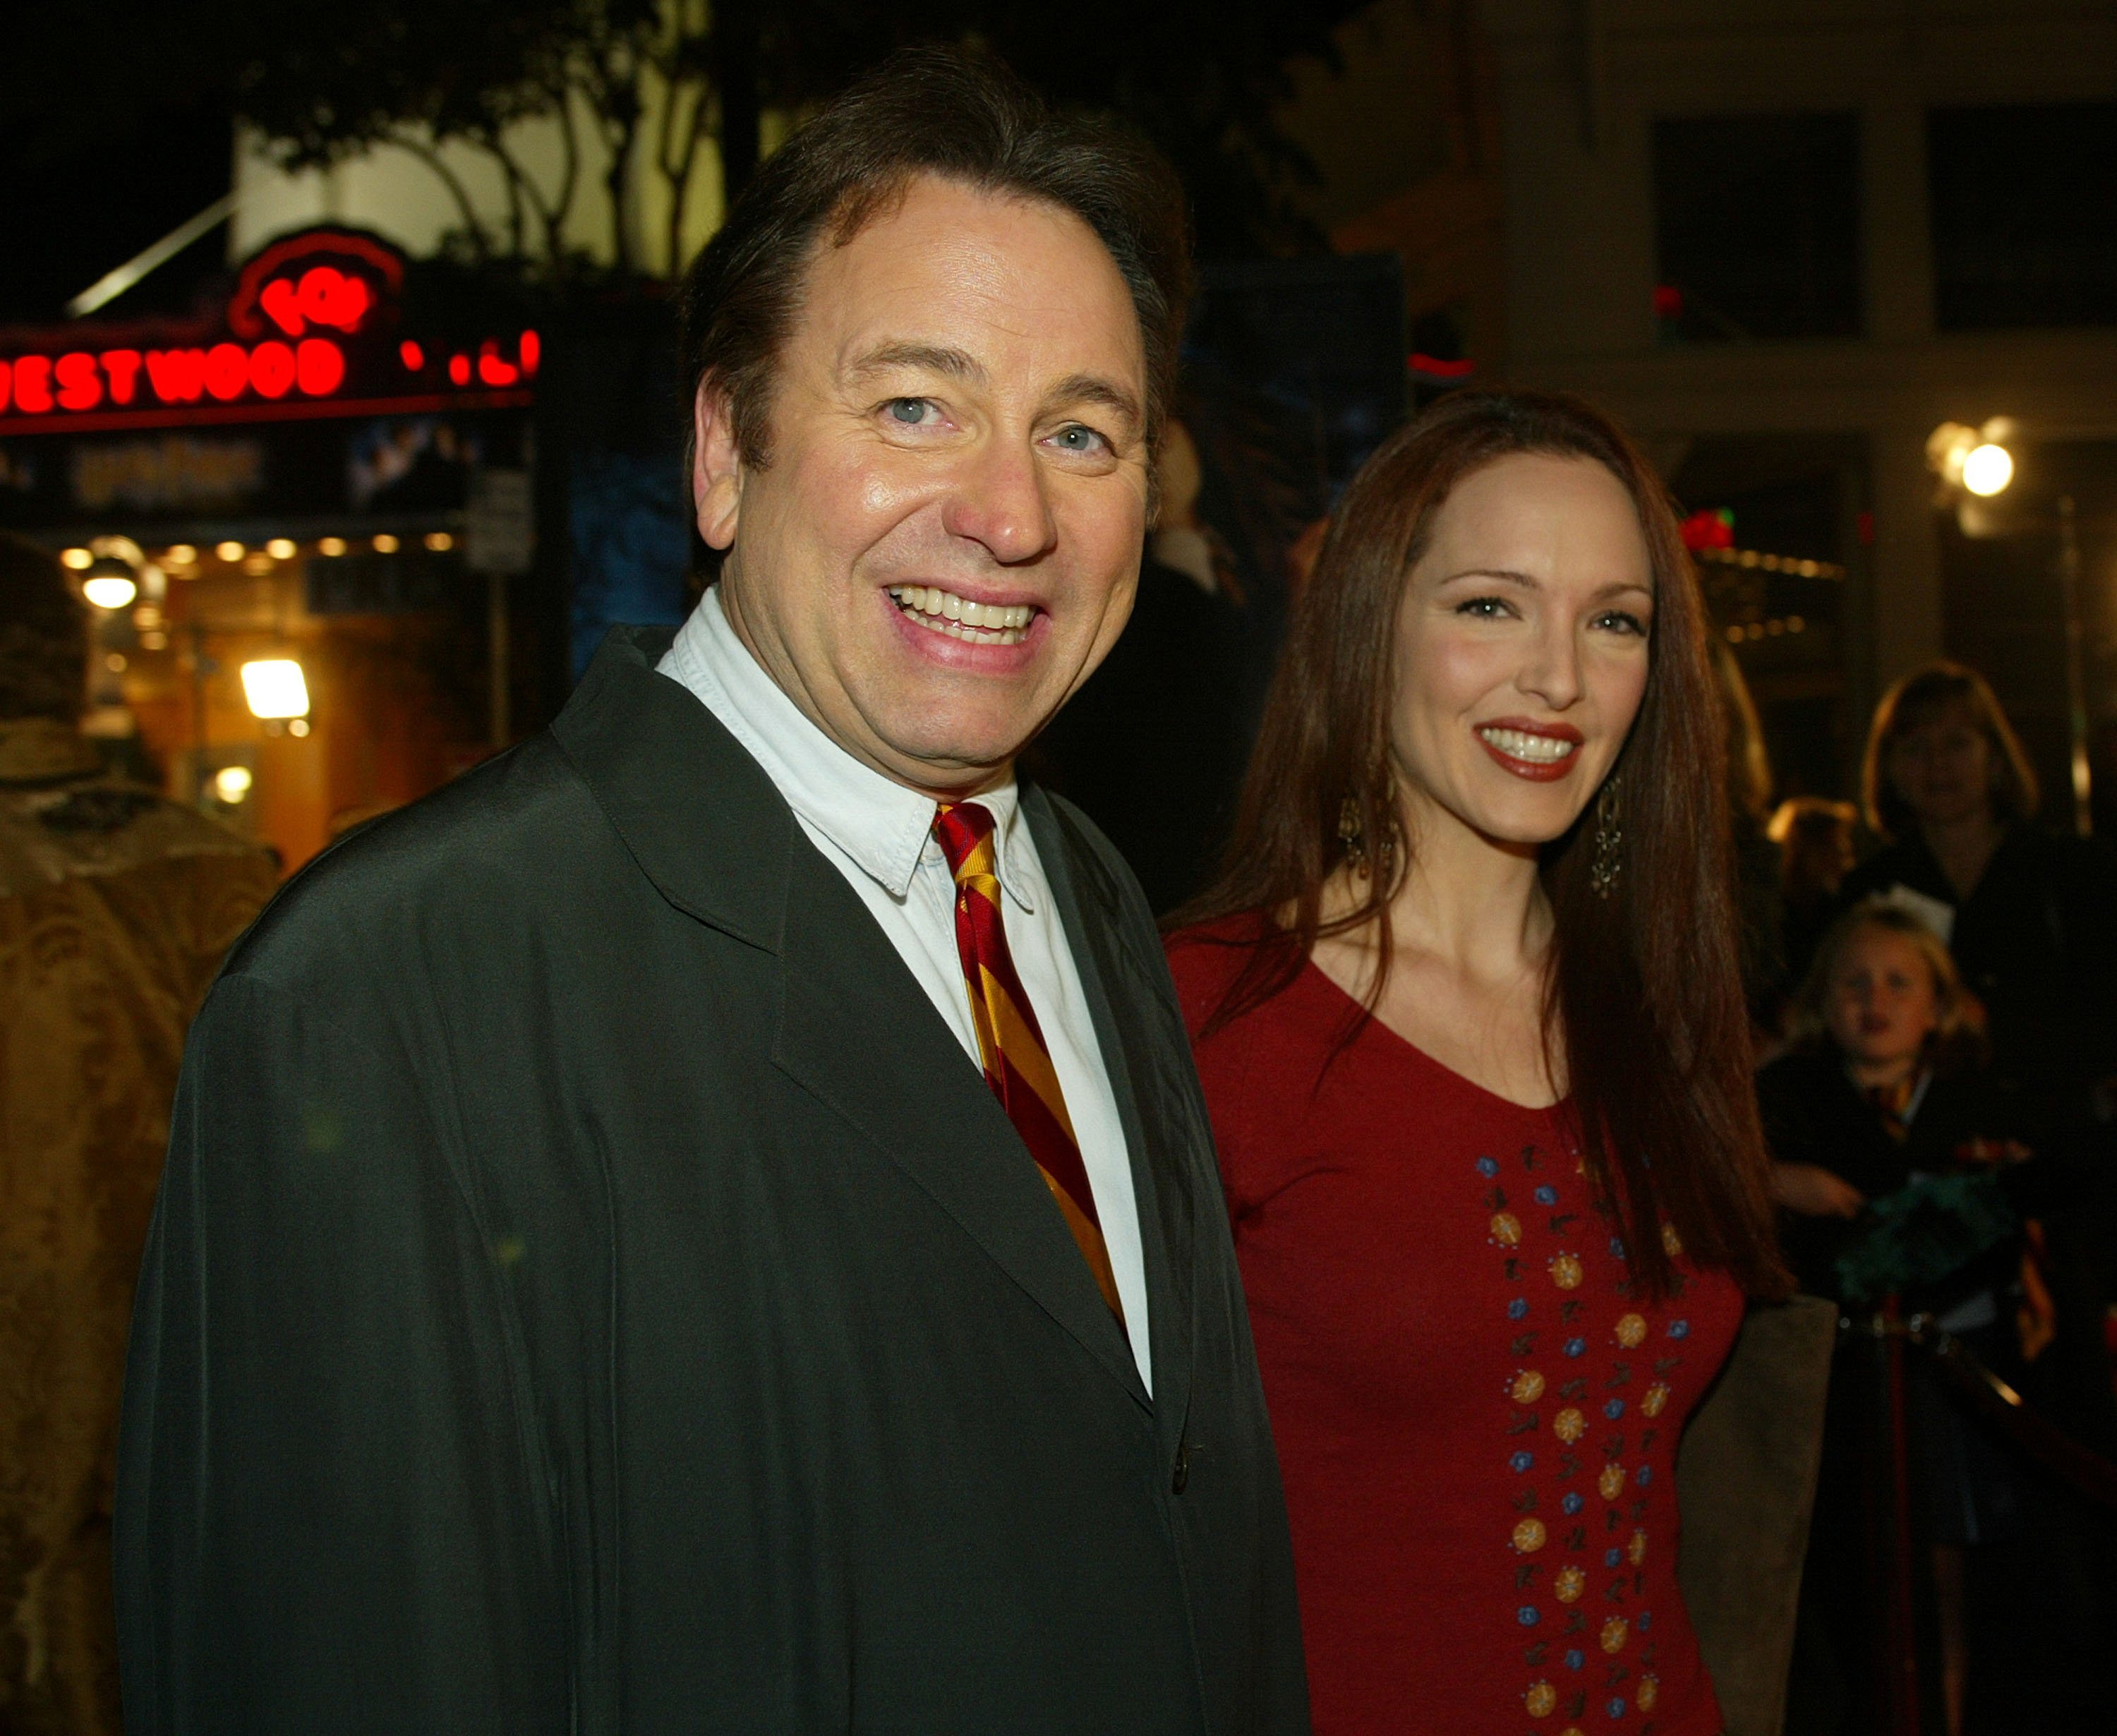 John Ritter and Amy Yasbeck at the premiere of " Harry Potter and the Chamber of Secrets" on Nov. 14, 2002 in Westwood, California. | Photo: Getty Images